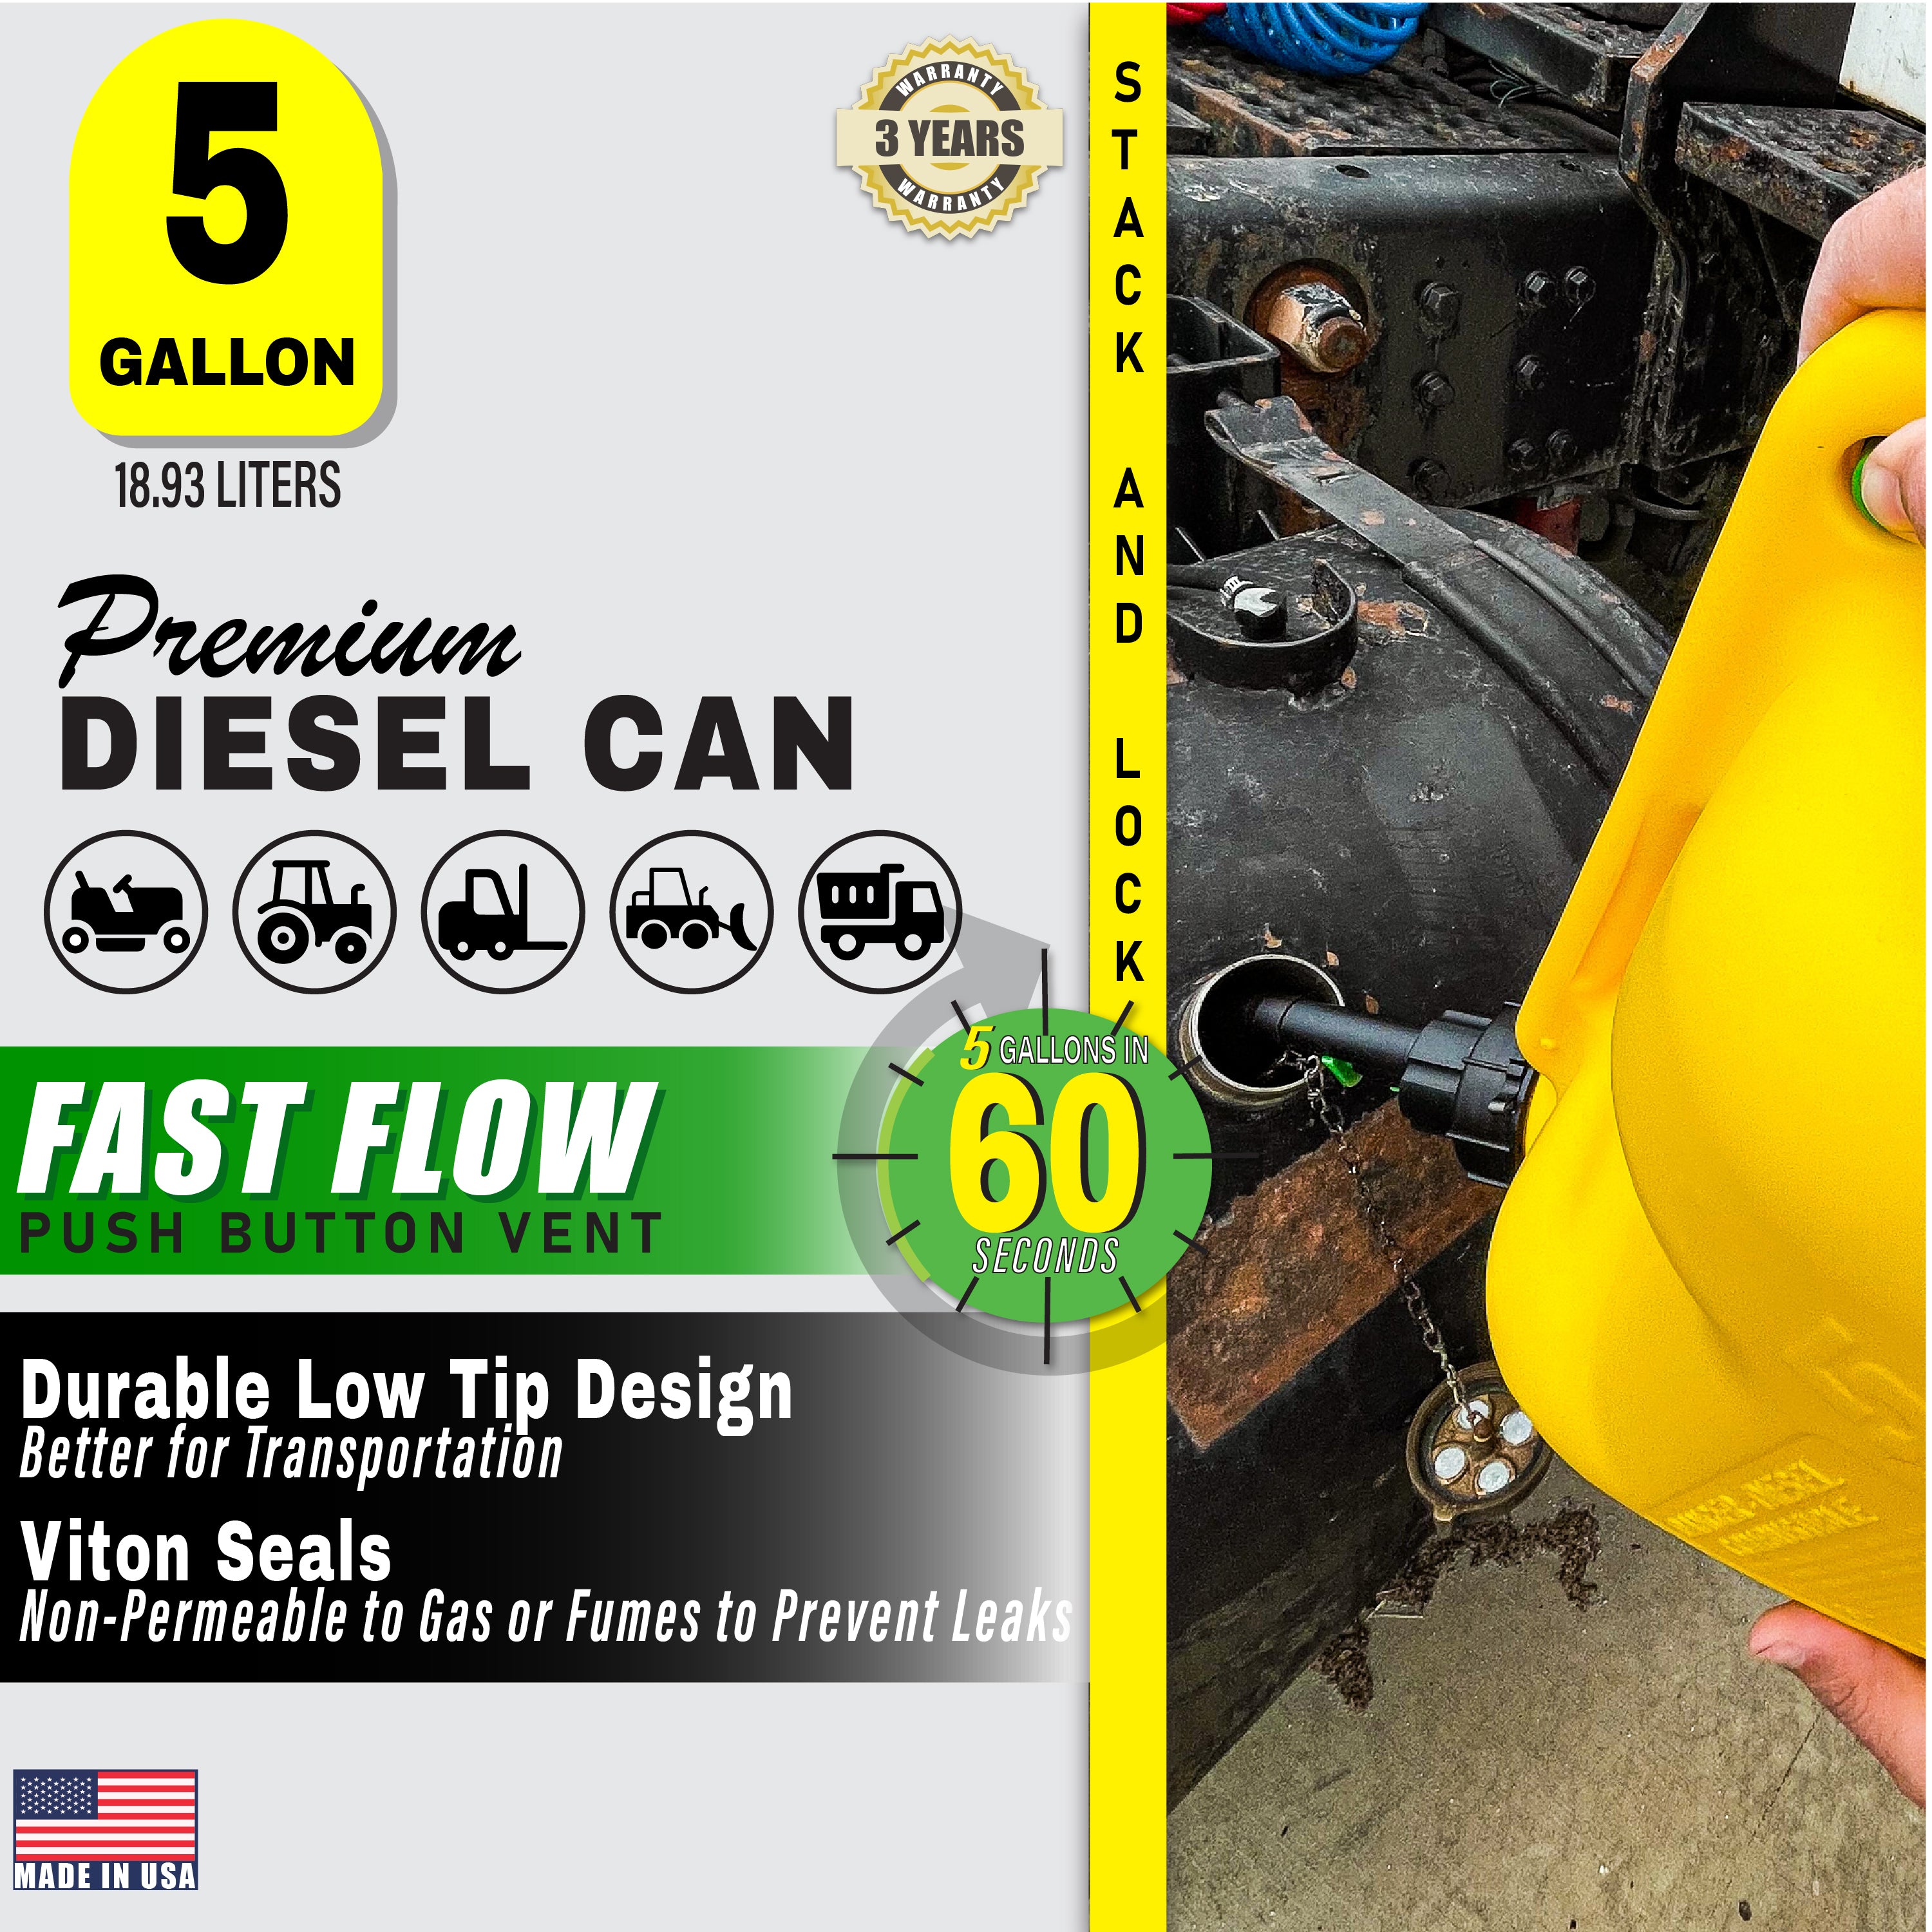 Fuelworx-Yellow-5-Gallon-Stackable-Fast-Pour-Diesel-Fuel-Cans-CARB-Compliant-Made-in-The-USA-5-Gallon-Diesel-Cans-2-Pack-image-4